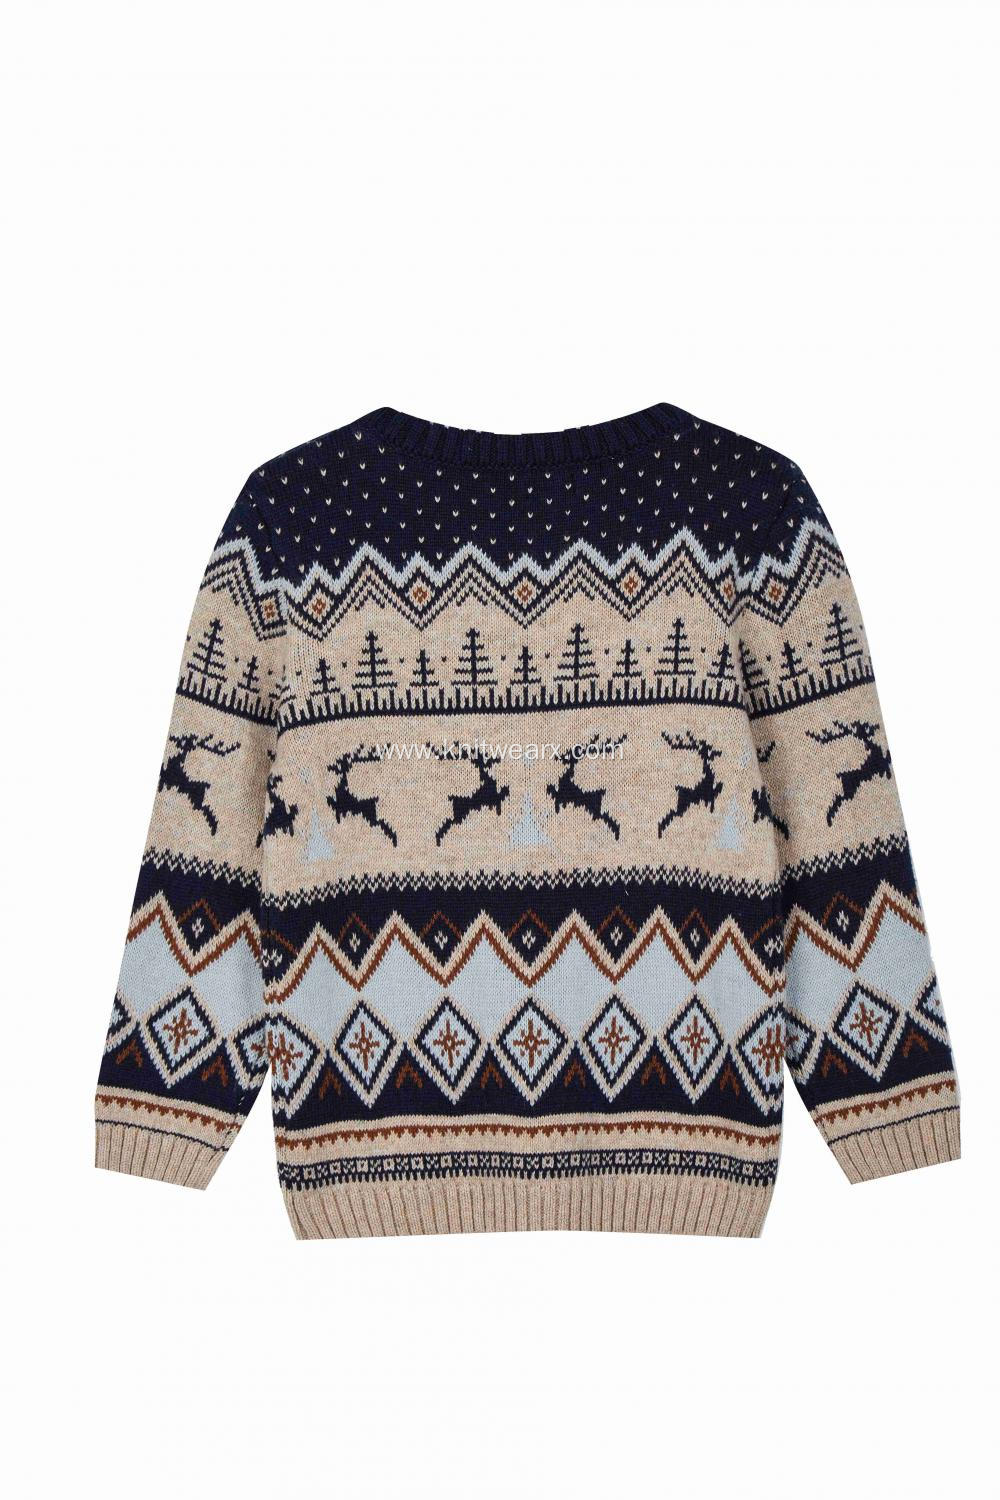 Boy's Knitted Christmas Reindeer Ugly Pullover